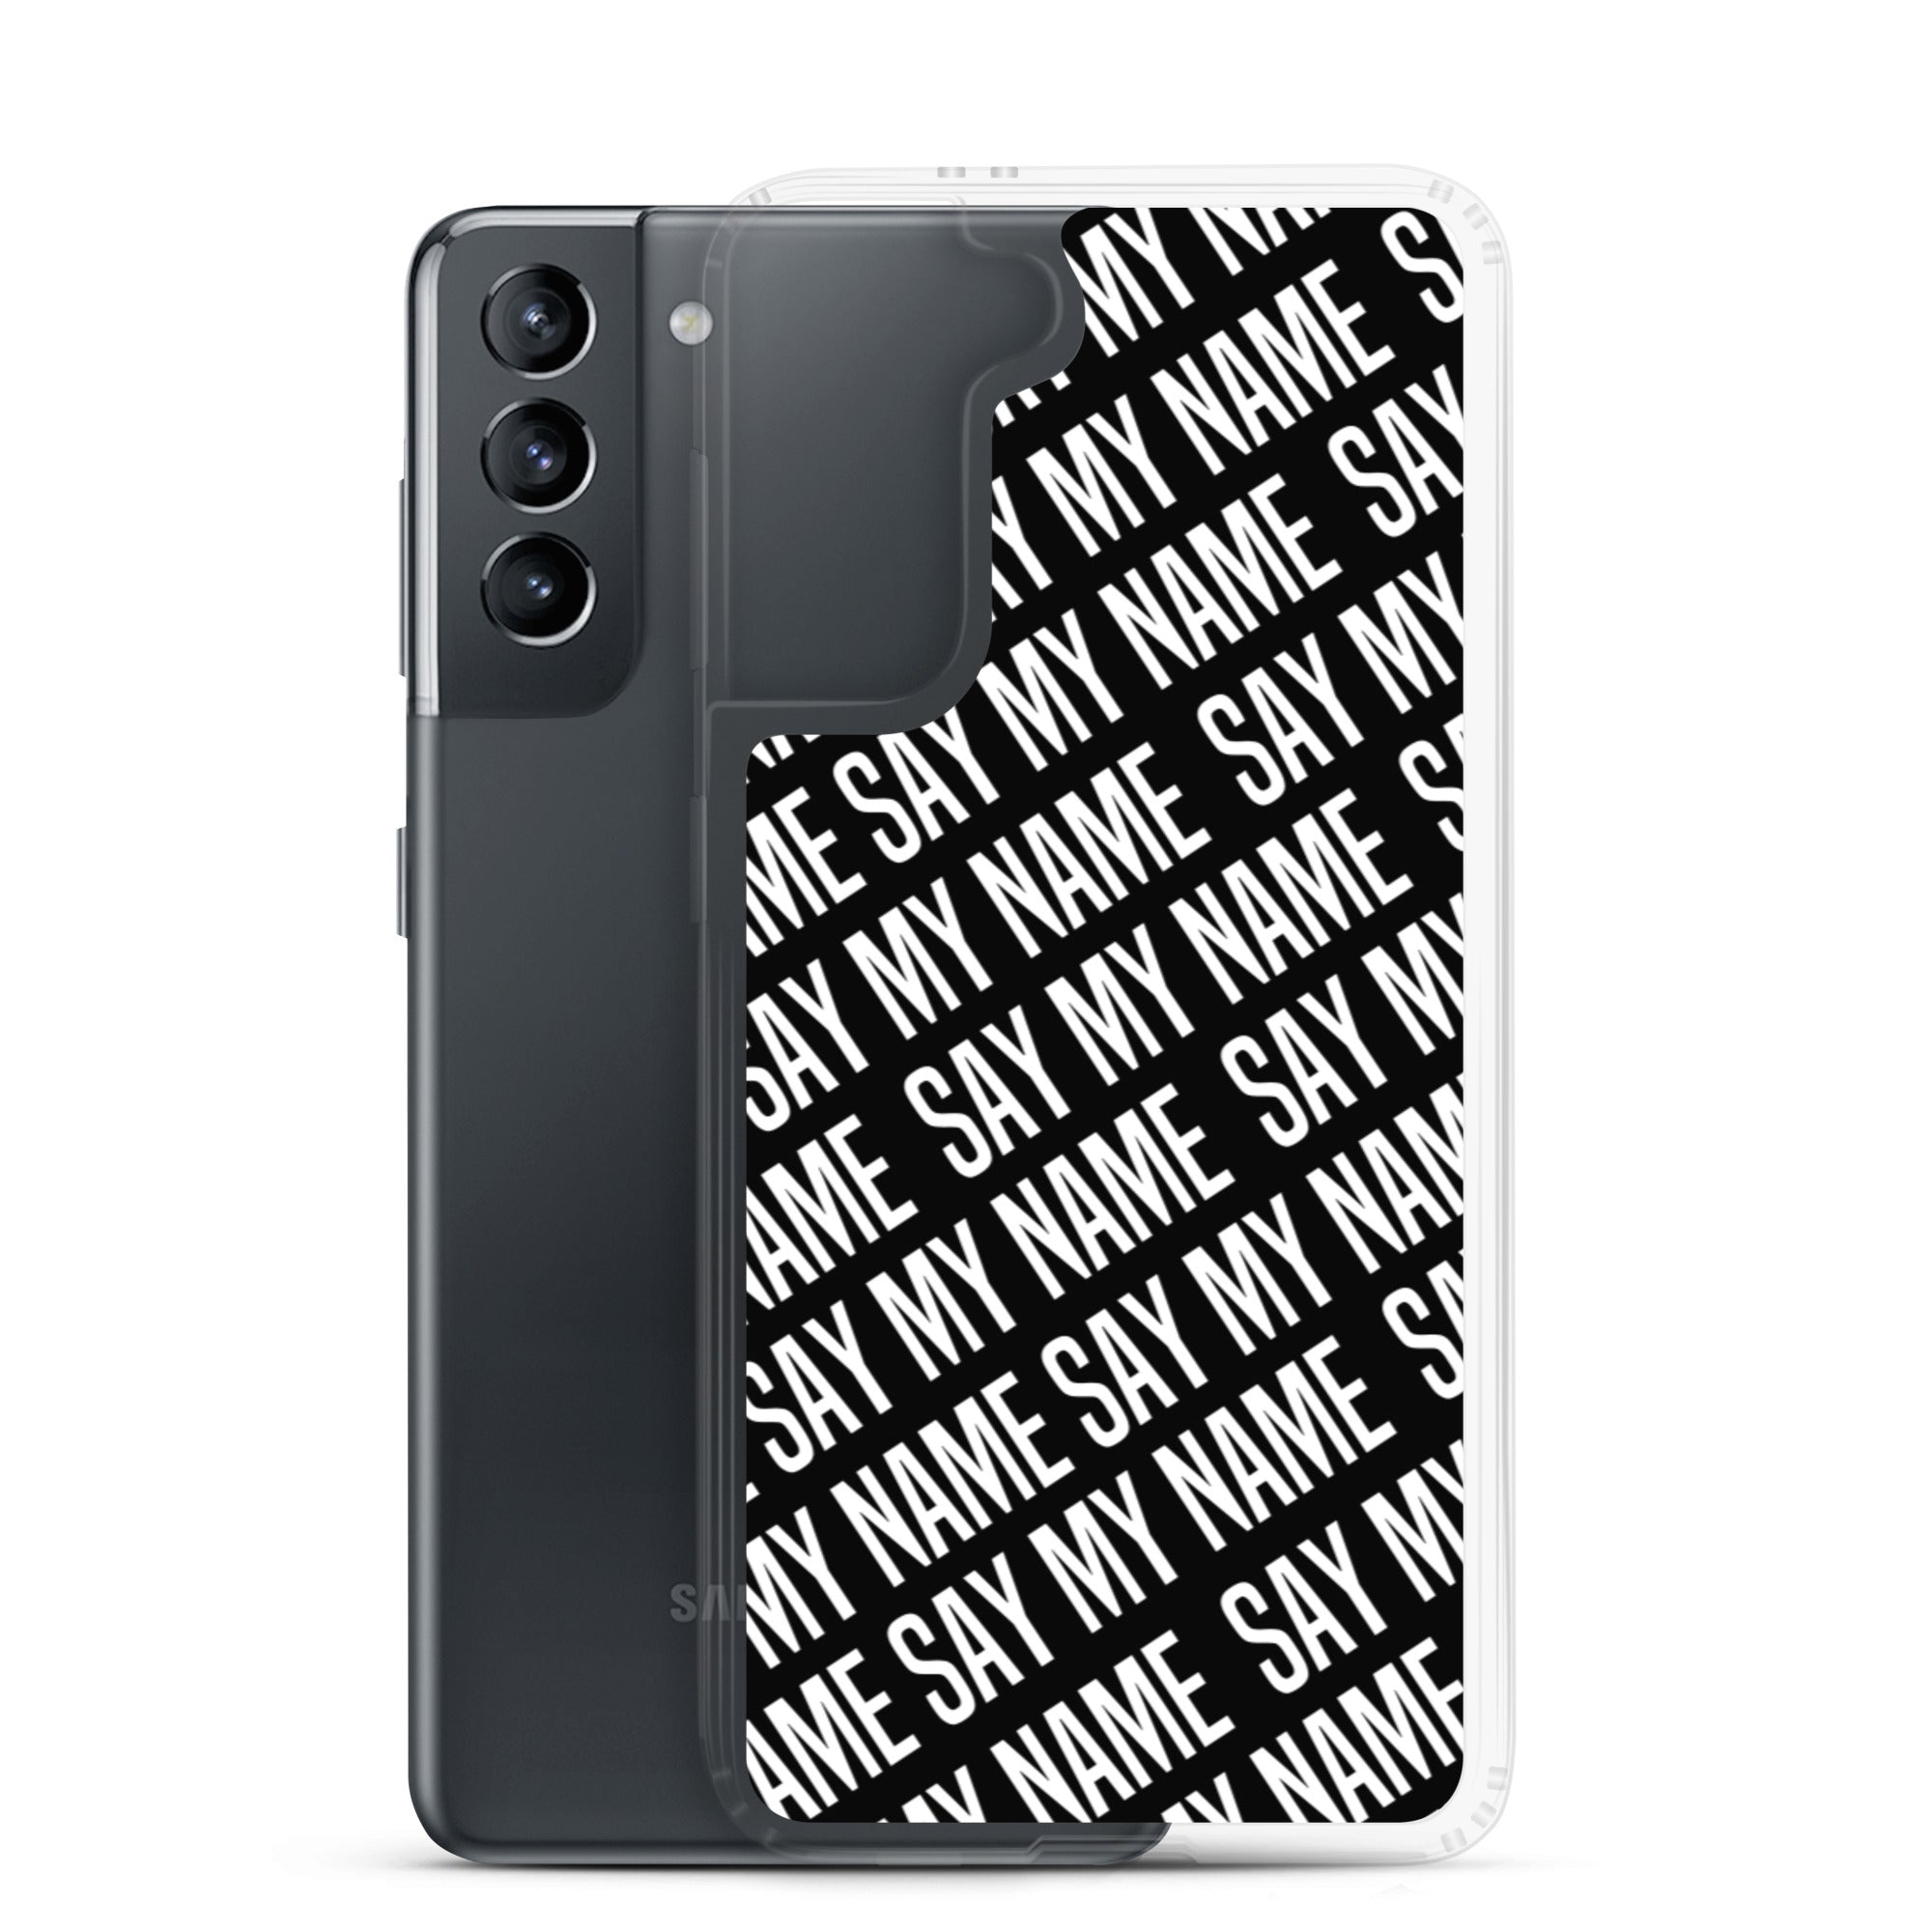 SAY MY NAME Samsung case